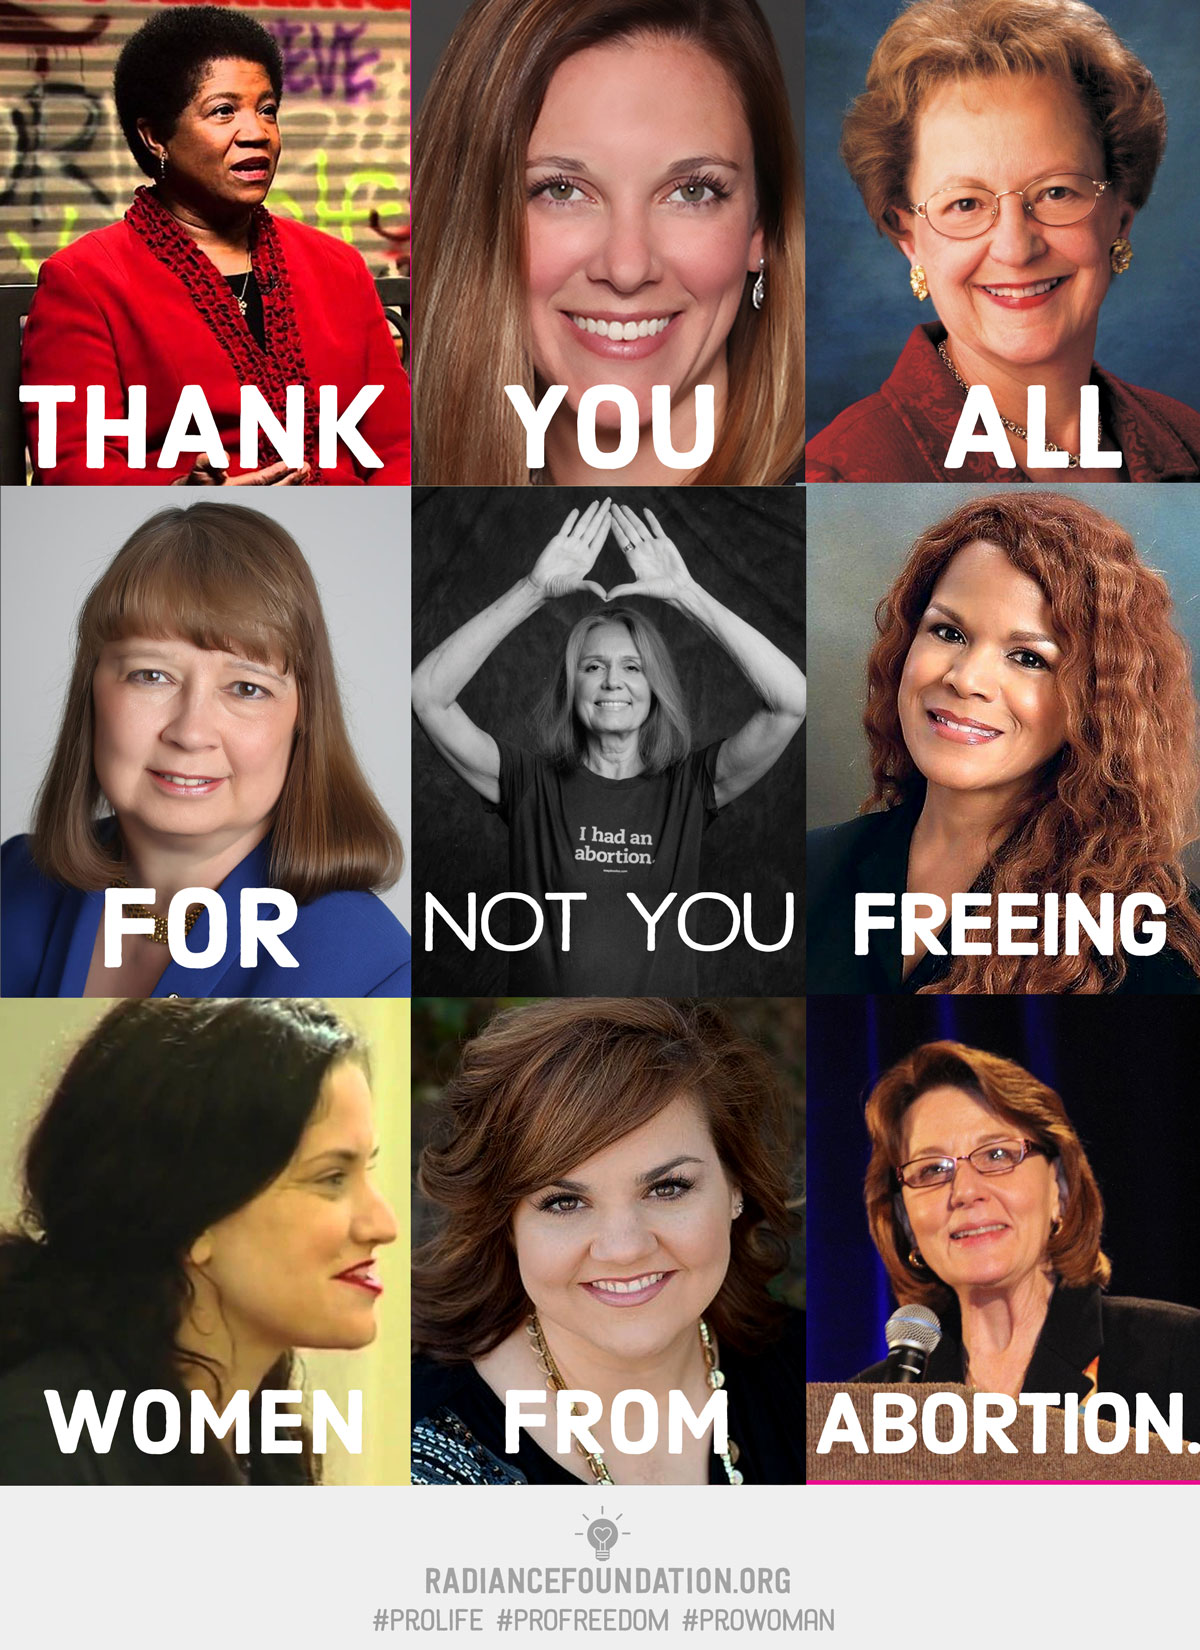 "NOT YOU - Freeing Women From Abortion" by The Radiance Foundation